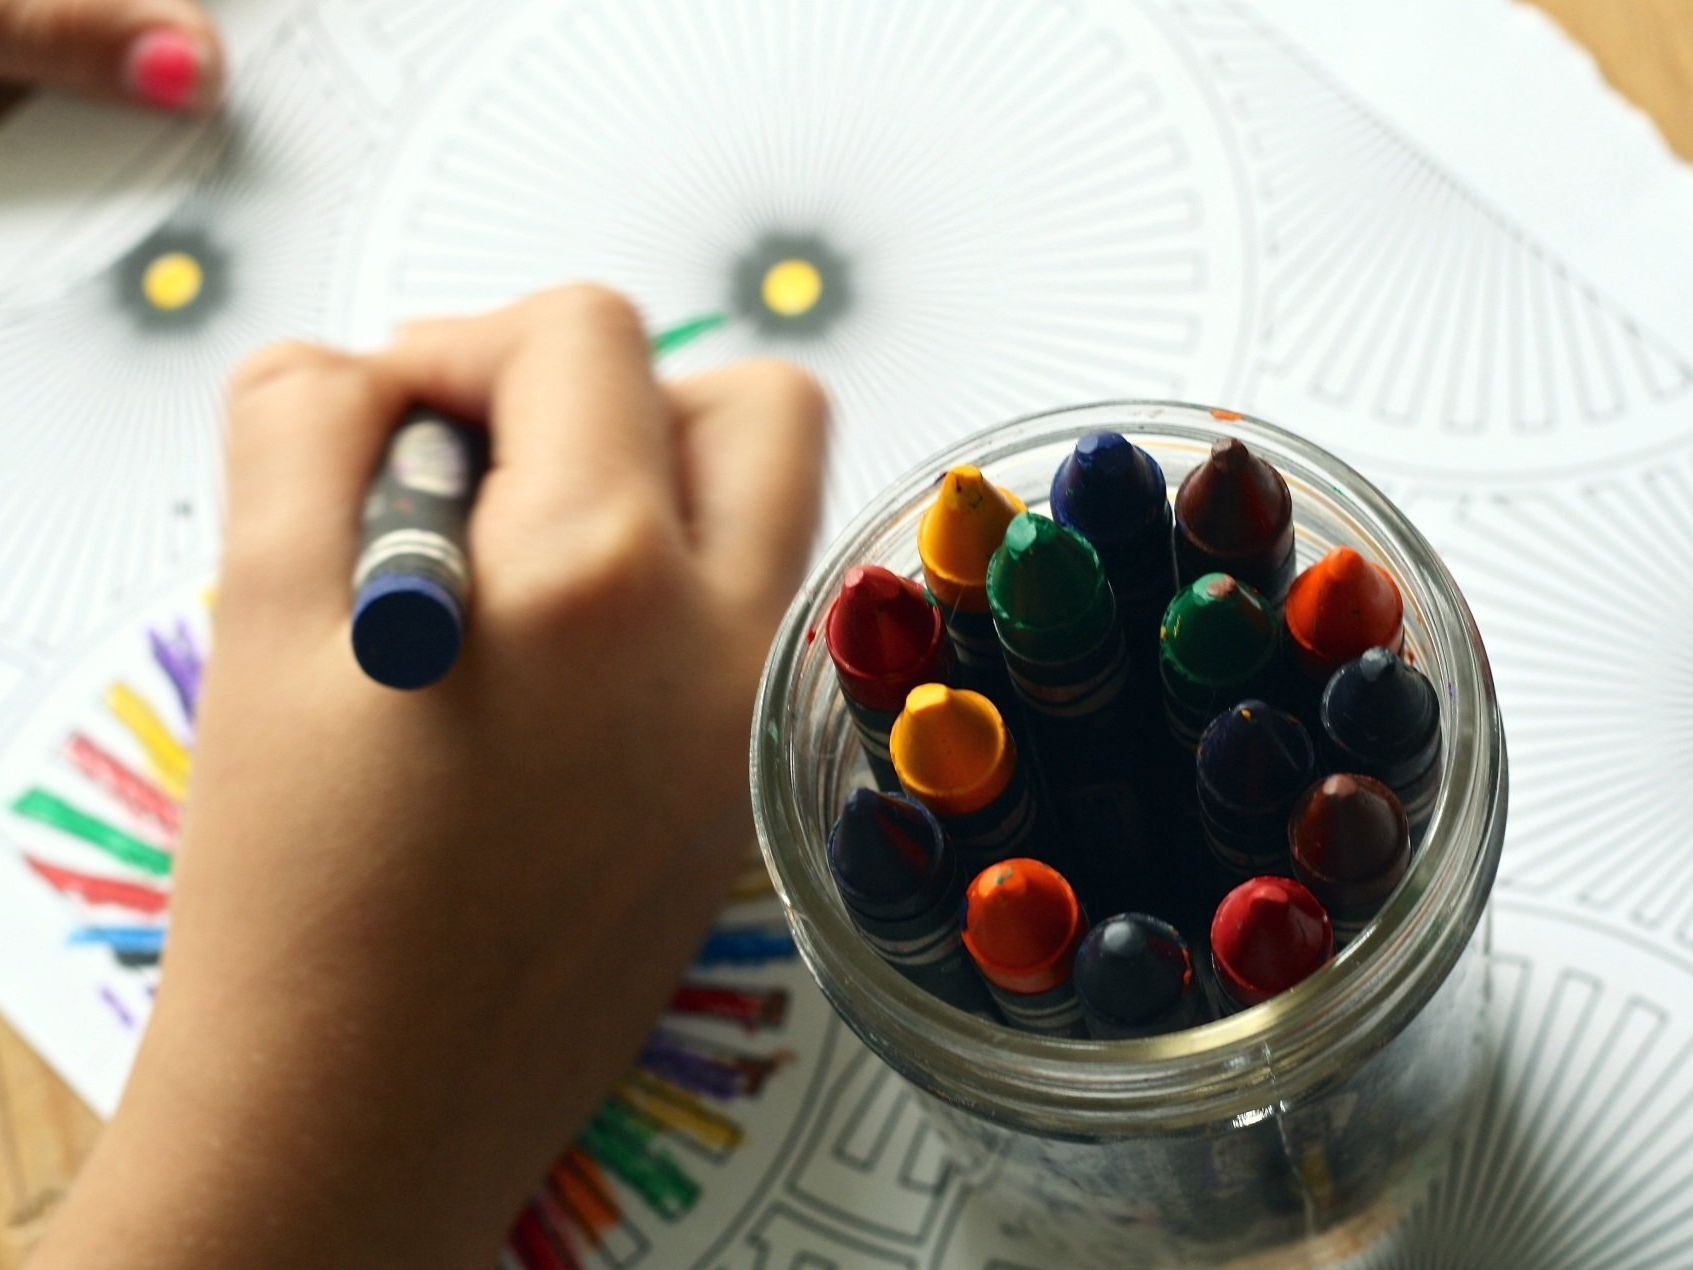 A child drawing with a crayon next to a jar of crayons